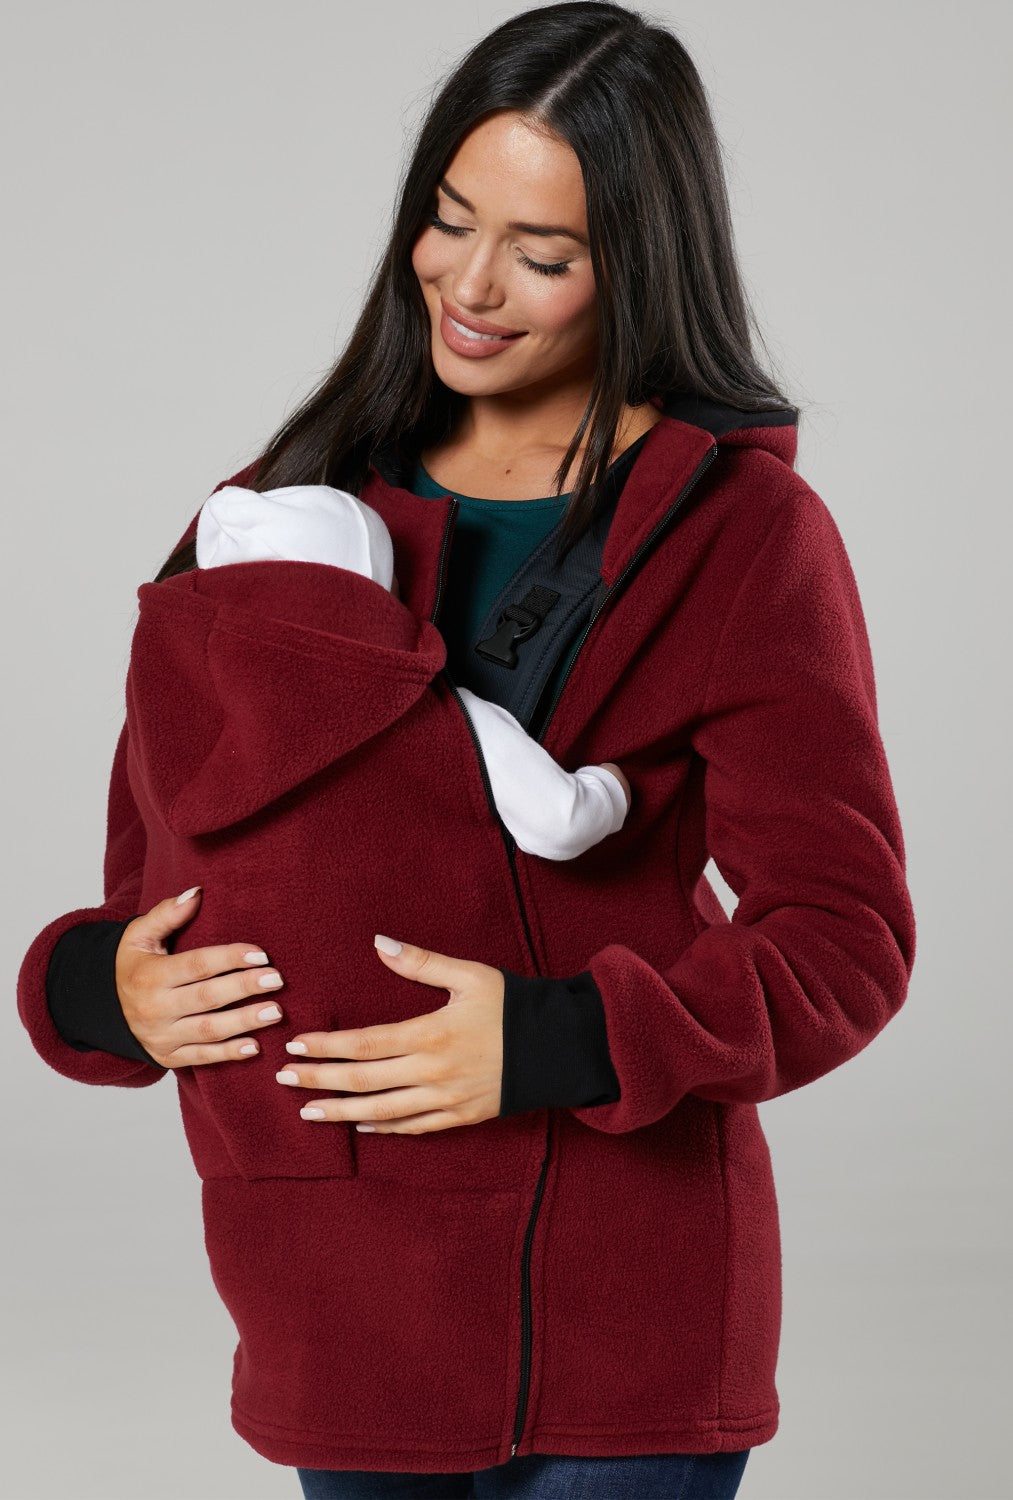 Maternity Hooded Baby Carrier